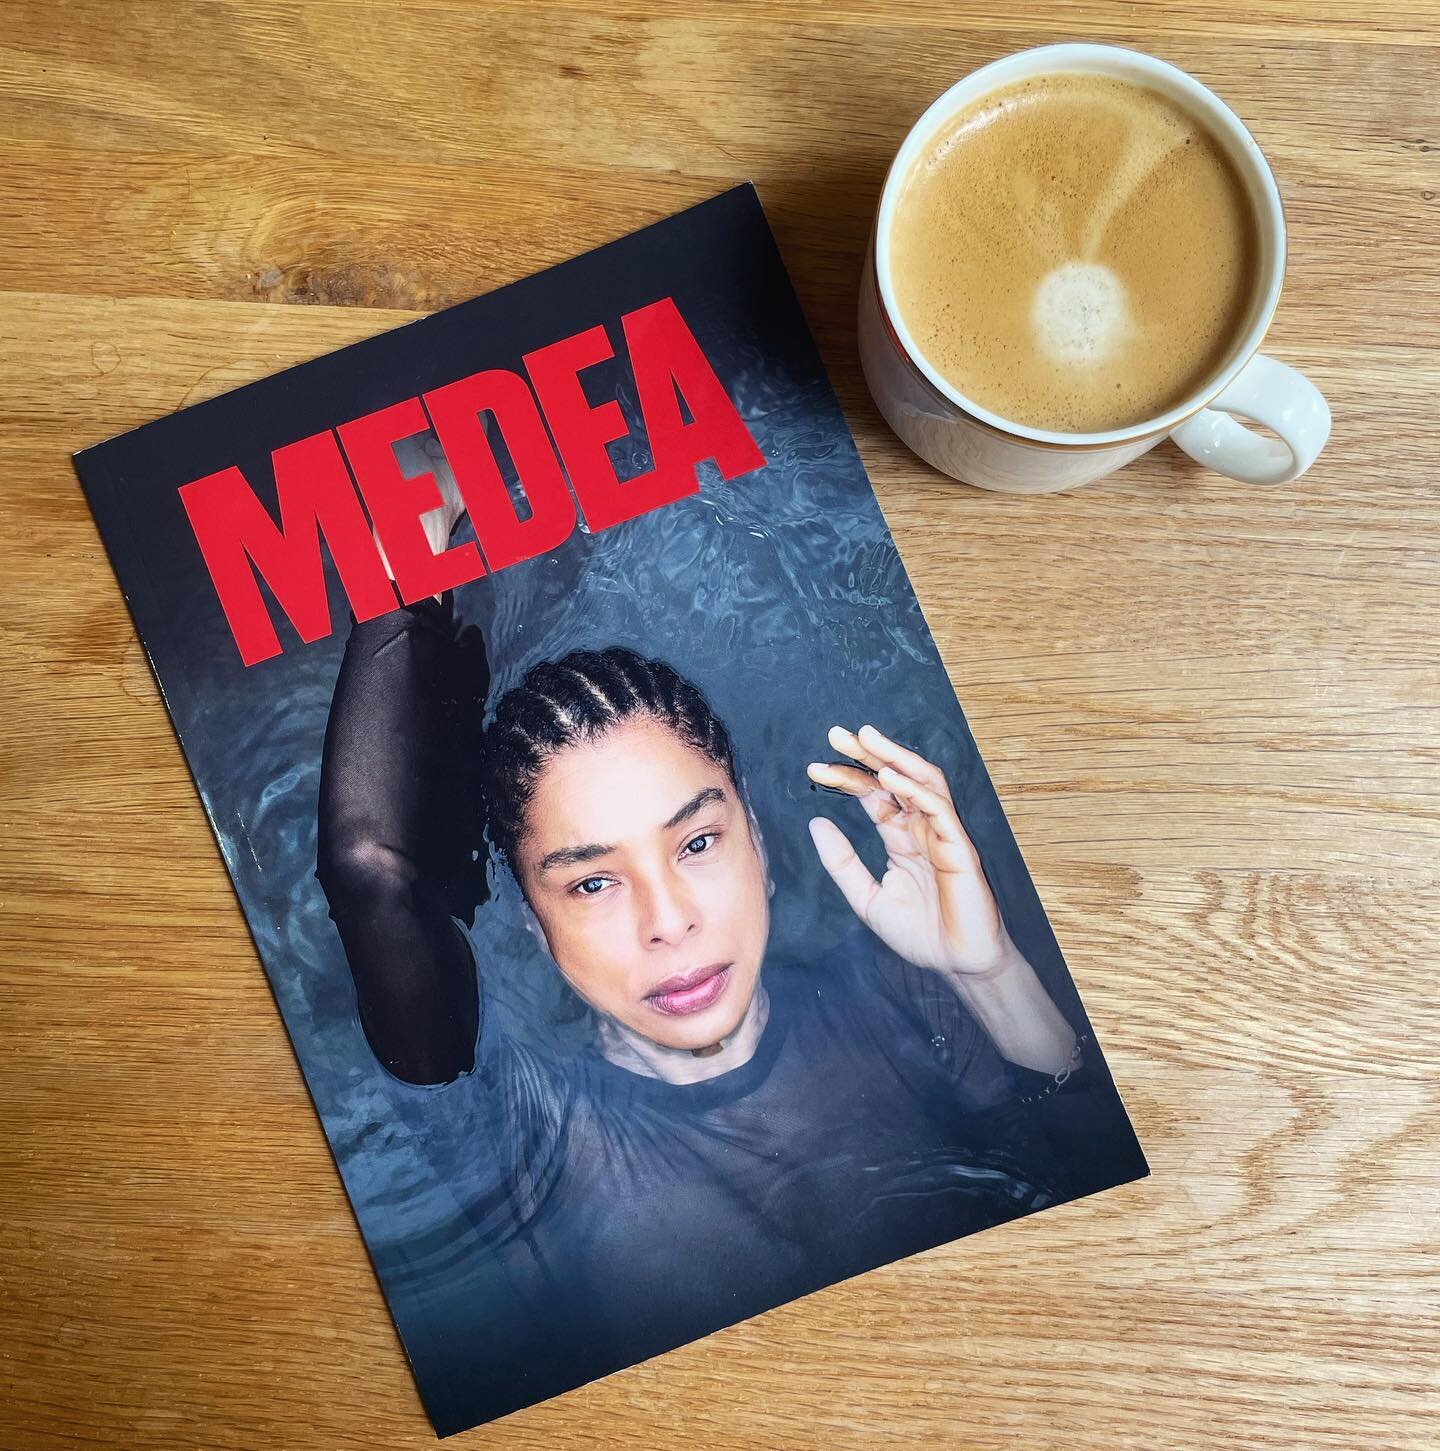 The other week I had the pleasure of seeing Euripides&rsquo; Medea at @sohoplace. 
&bull;
I love seeing the different ways Medea is brought to life and Sophie Okonedo&rsquo;s performance was simply breathtaking. She commanded the stage with such powe